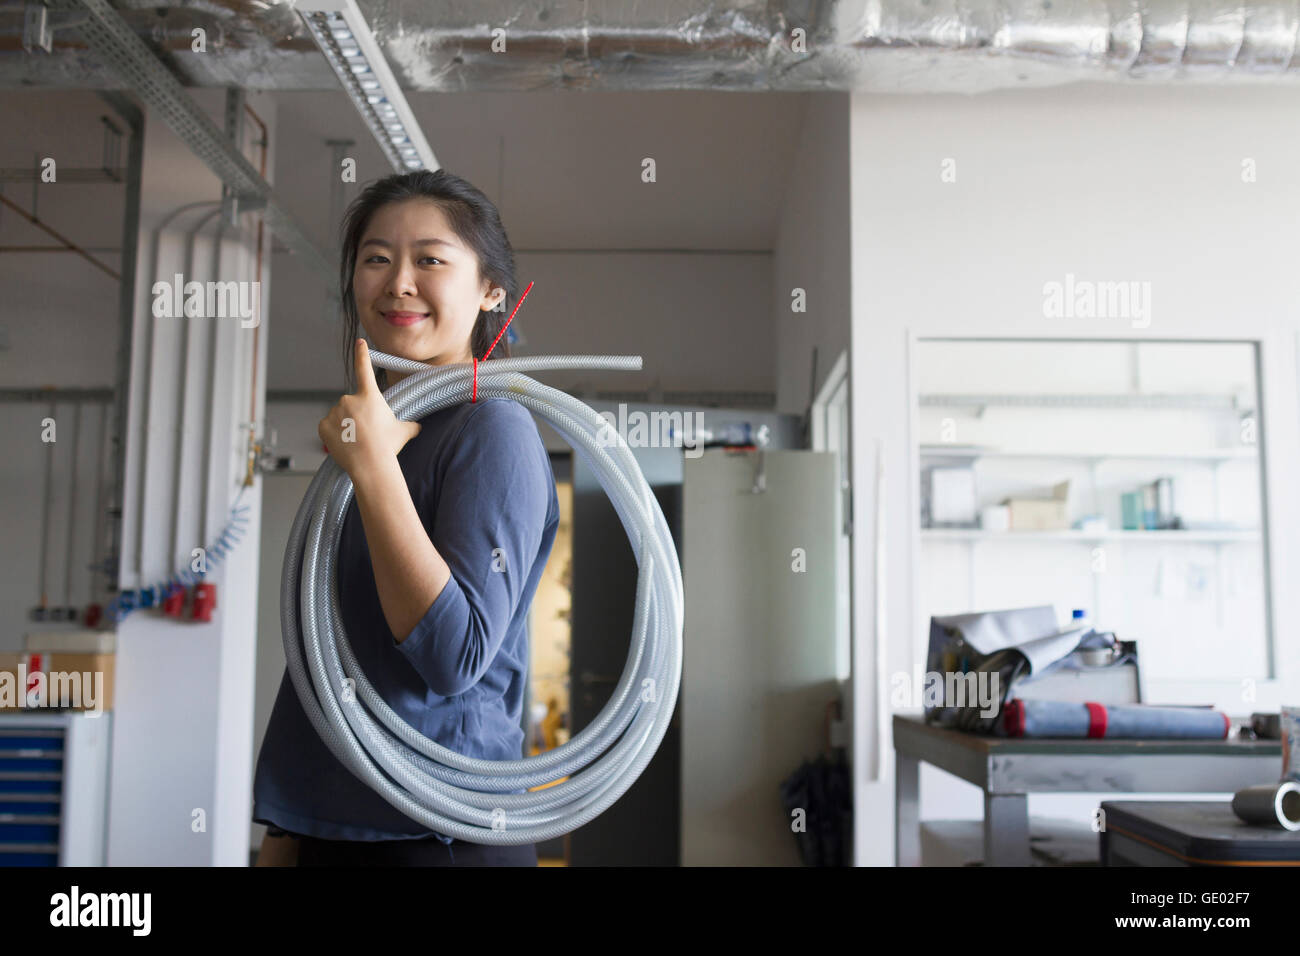 Young female engineer with pipe on her shoulder in an industrial plant, Freiburg im Breisgau, Baden-Württemberg, Germany Stock Photo